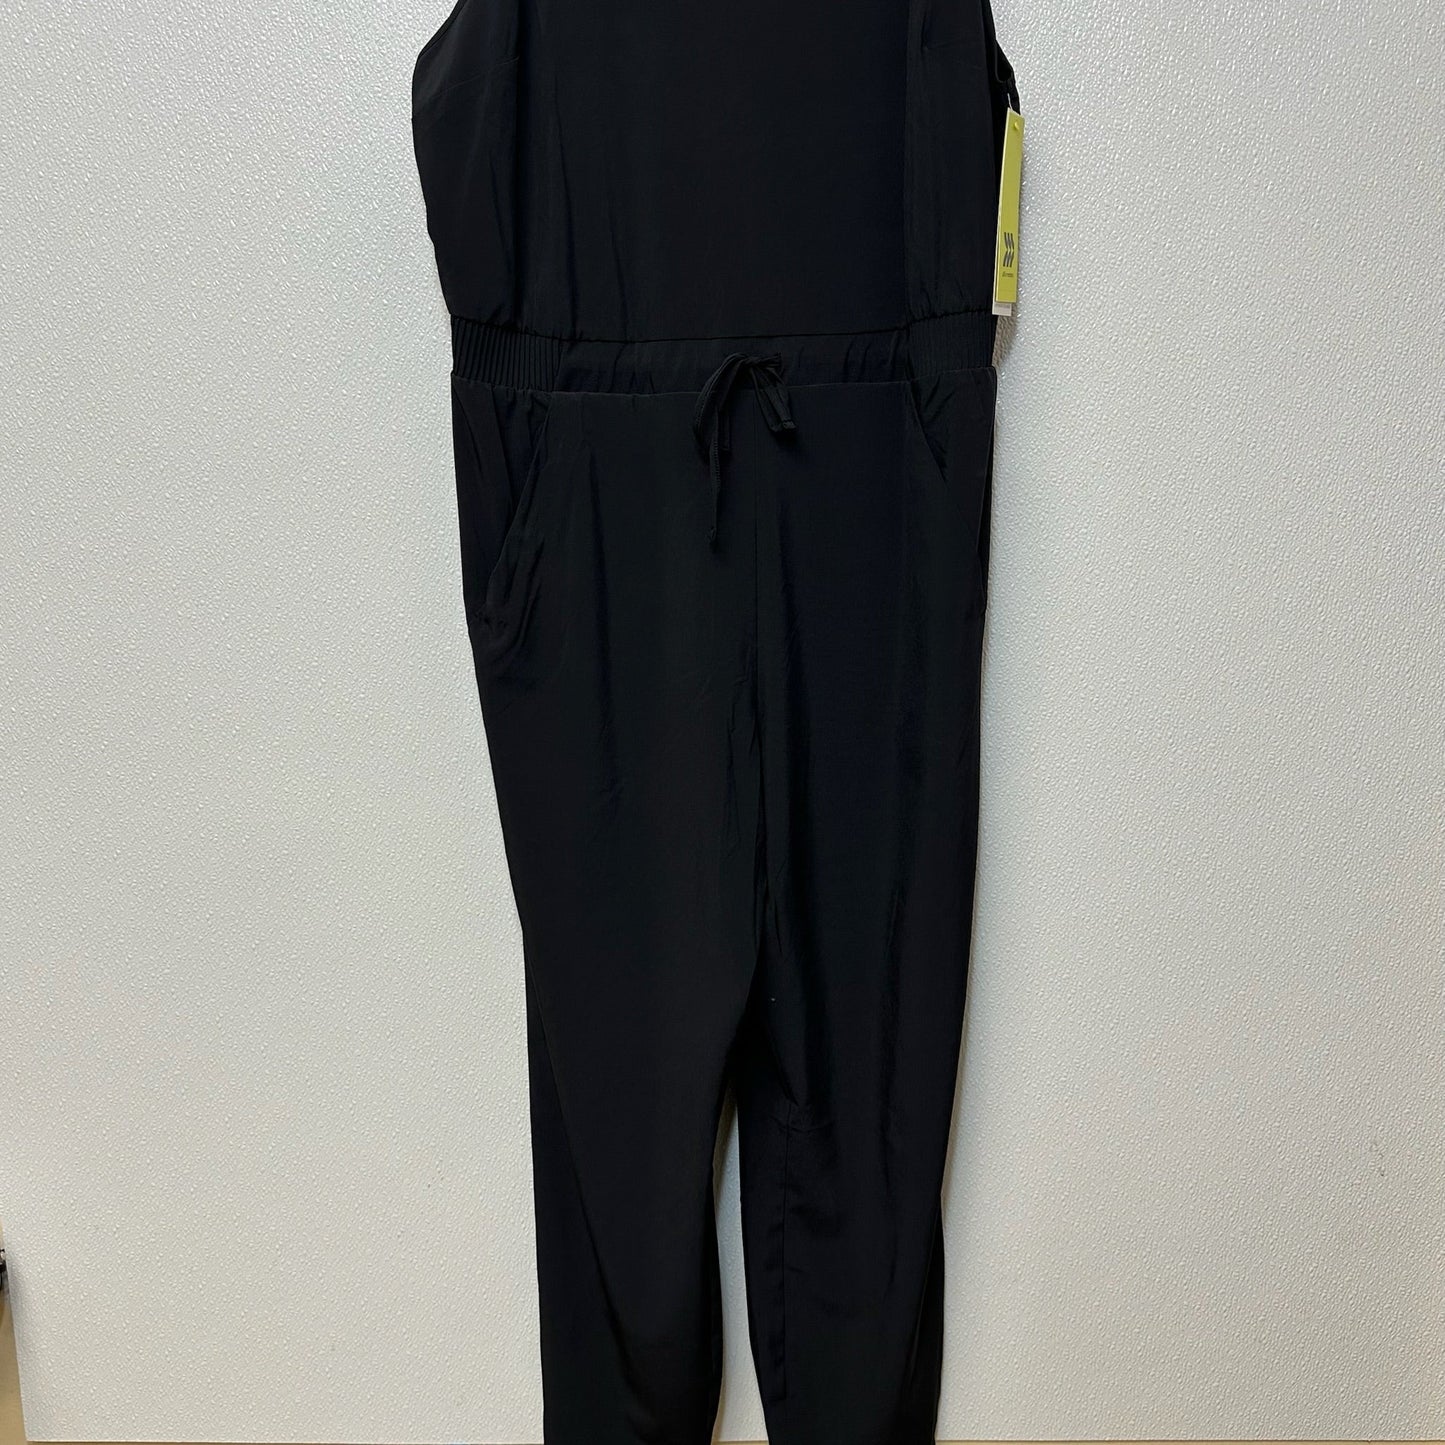 Black Jumpsuit All in Motion, Size L